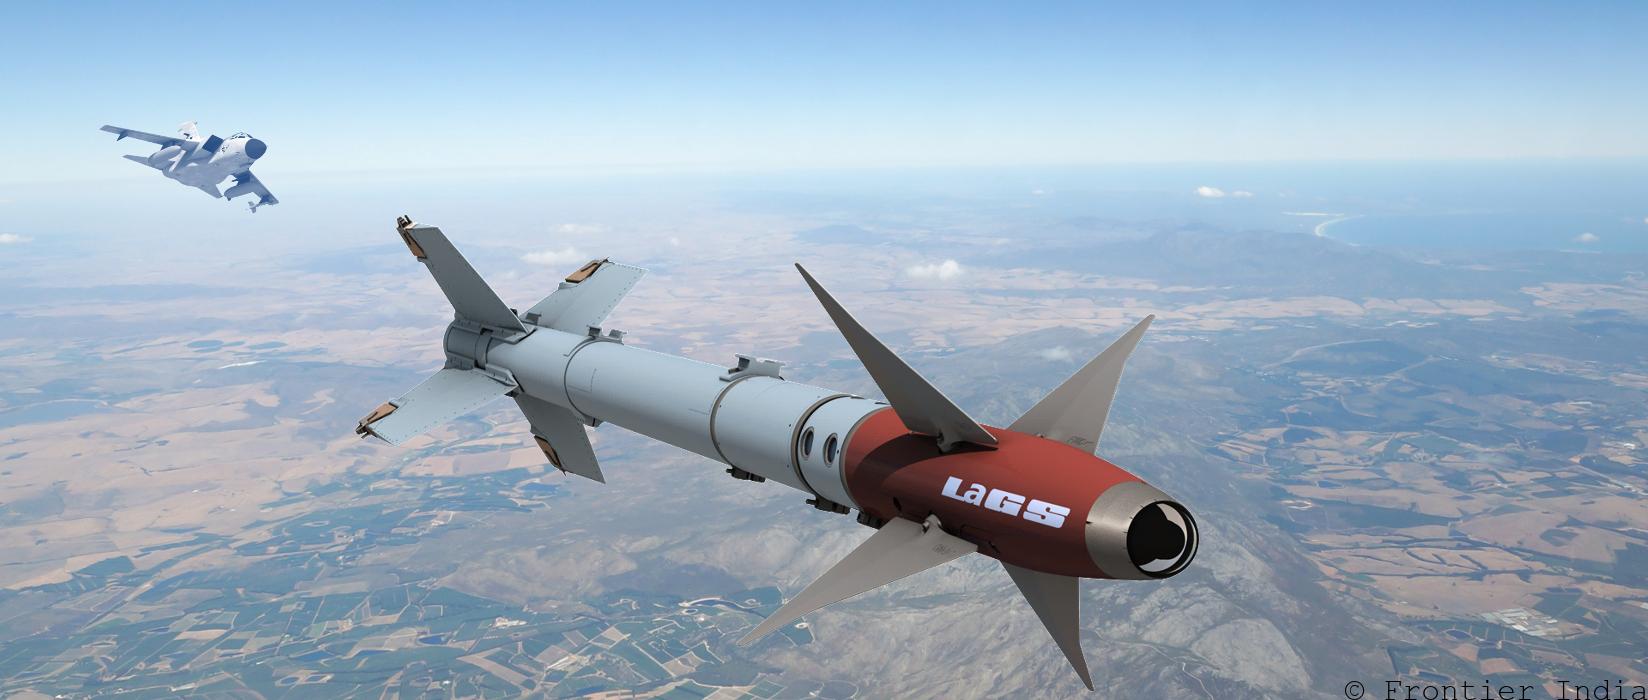 Laser Guided Sidewinder for air-to-ground mission, Diehl LaGS